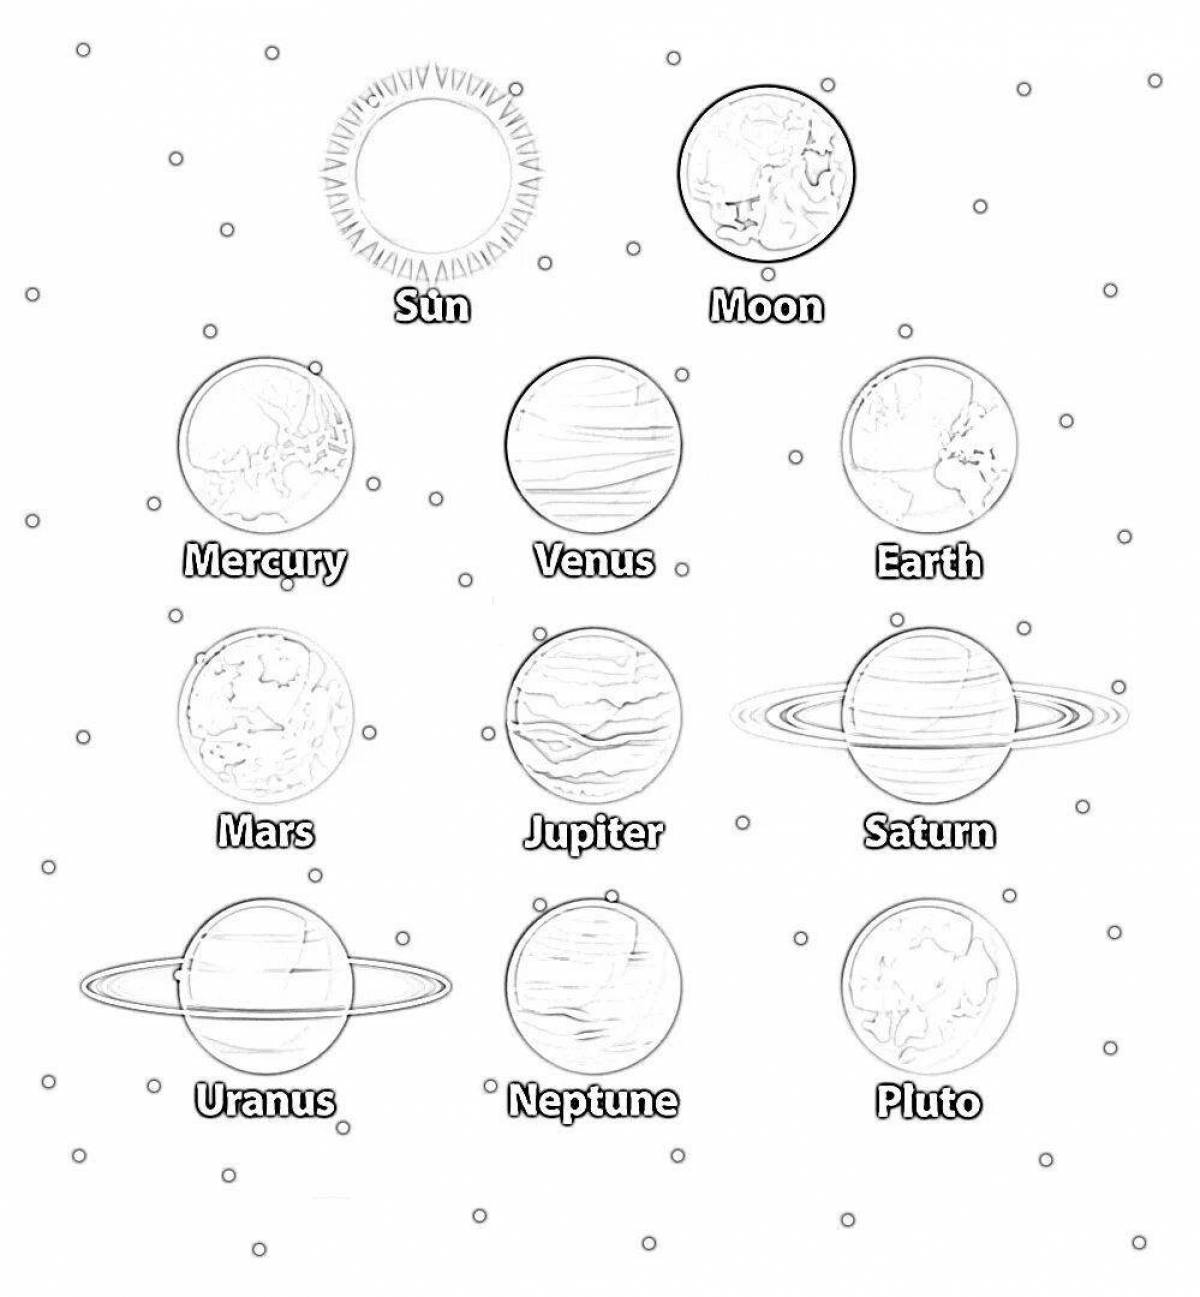 Charming coloring of planets in the solar system